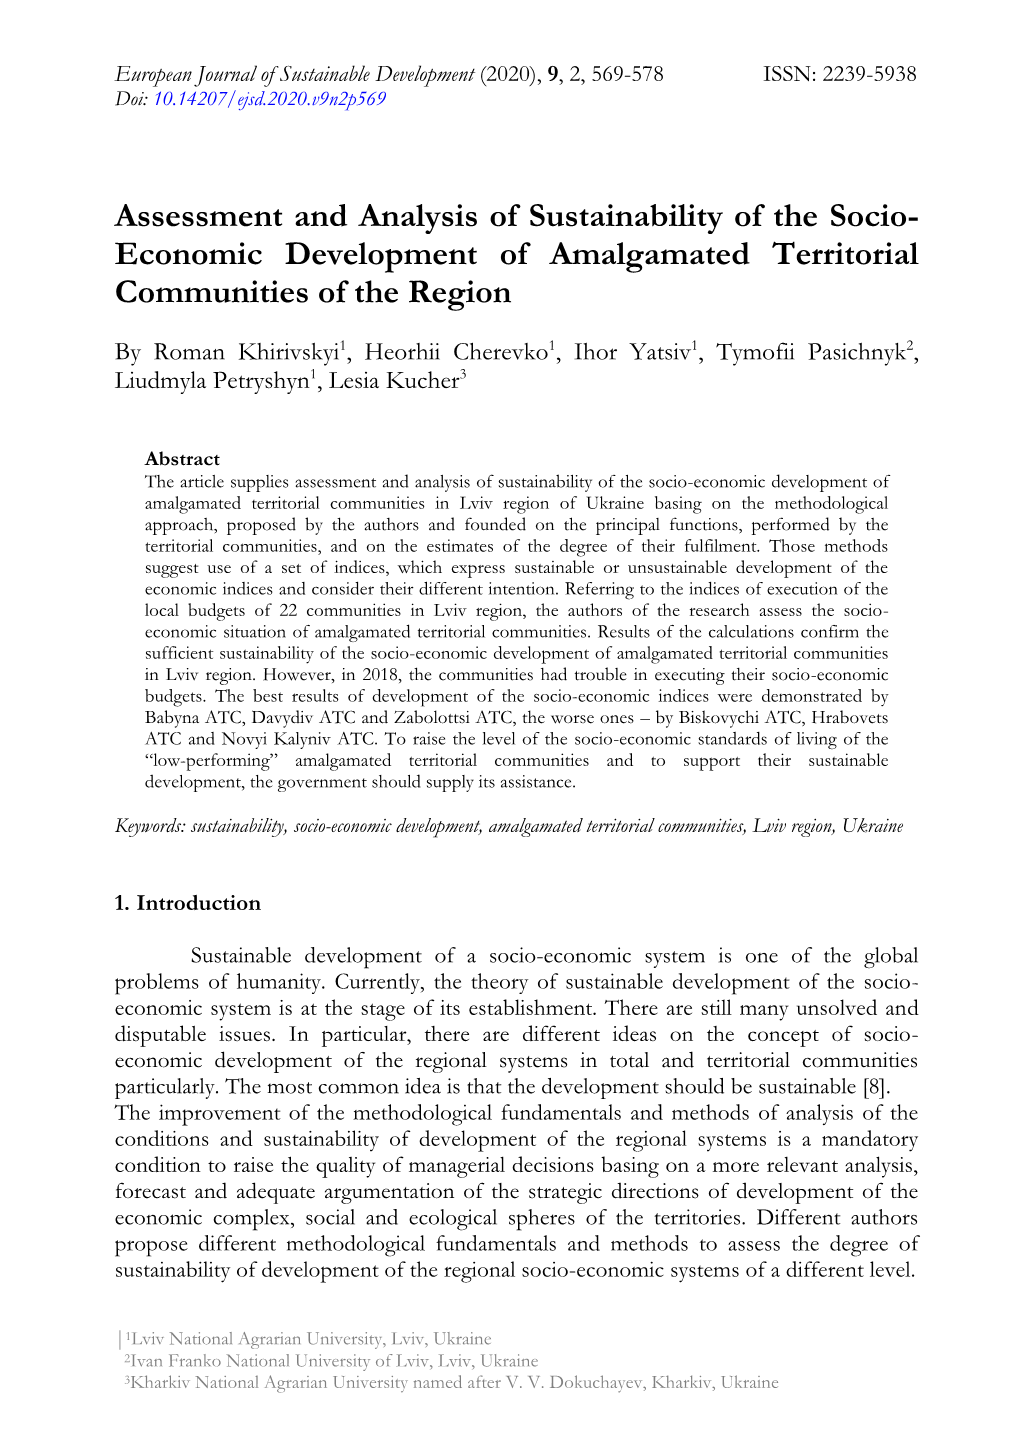 Assessment and Analysis of Sustainability of the Socio- Economic Development of Amalgamated Territorial Communities of the Region